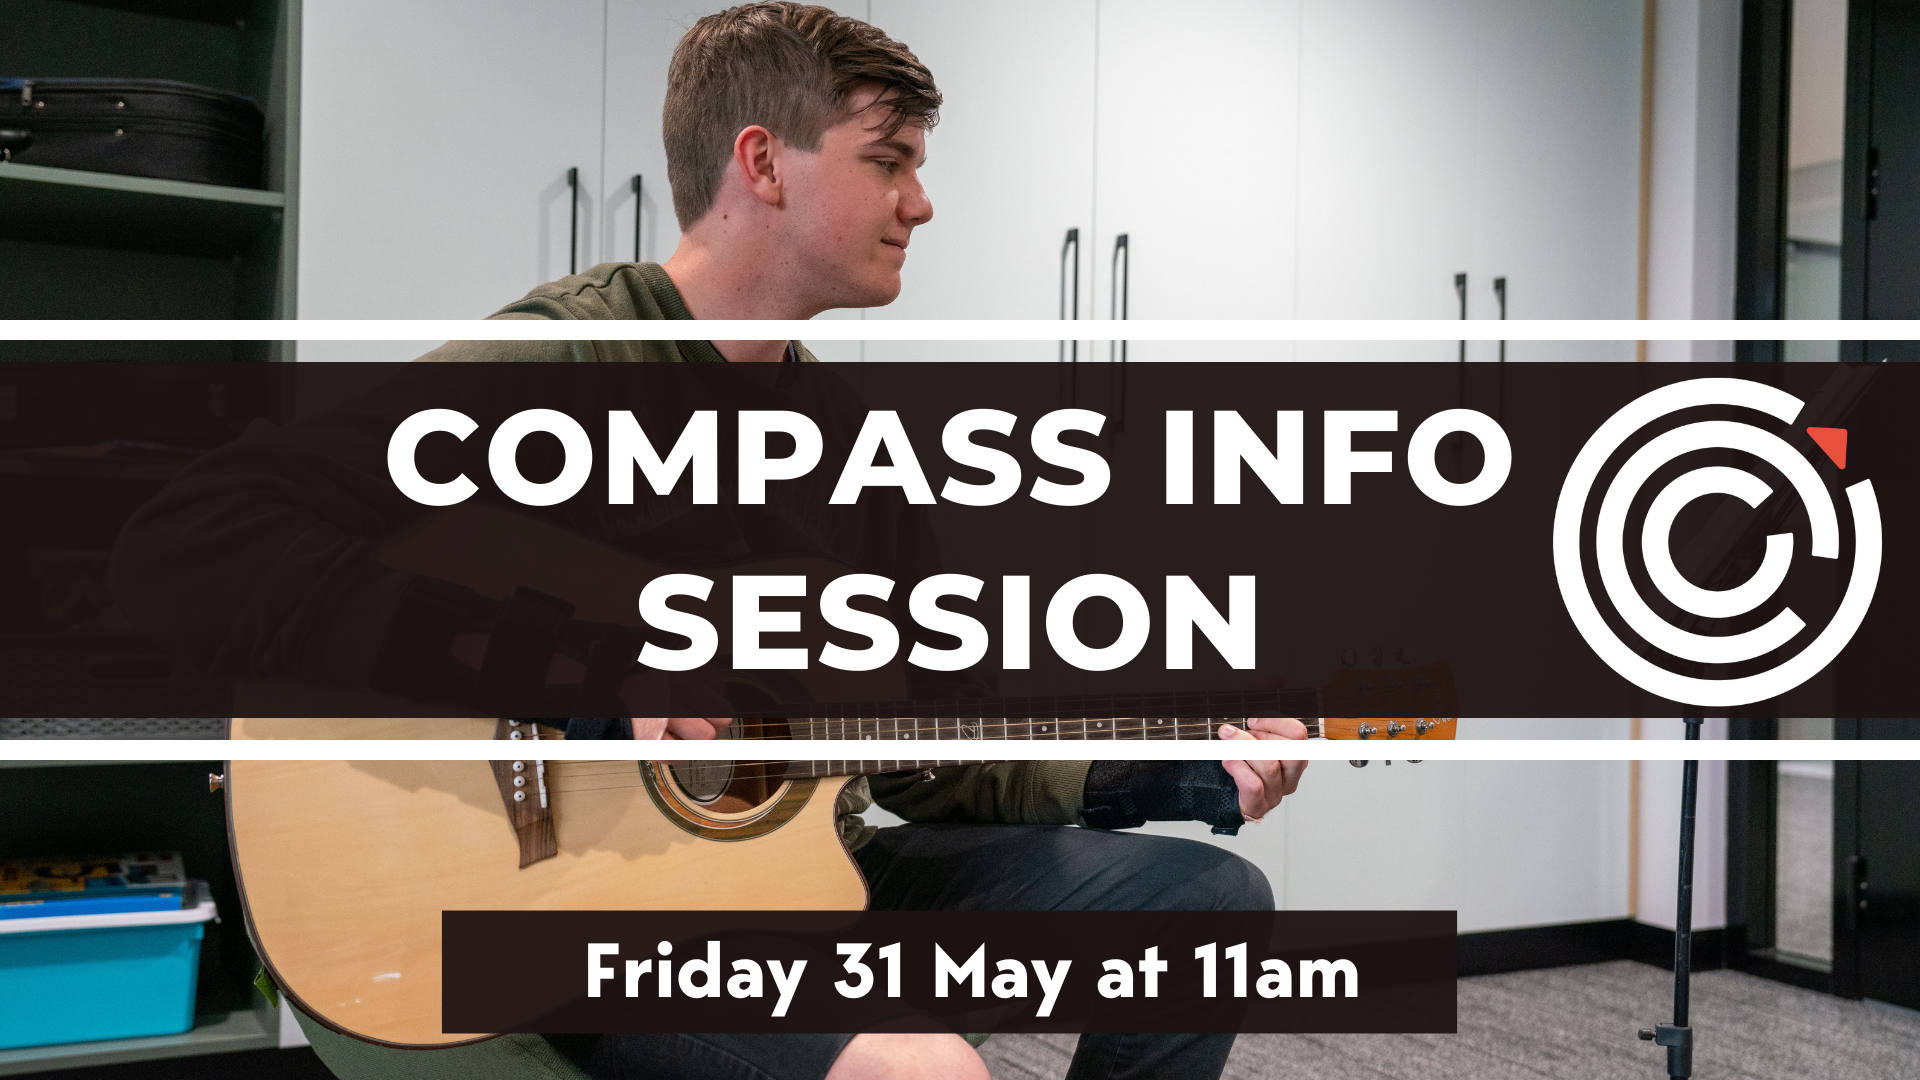 Compass Info Session - Friday 31 May